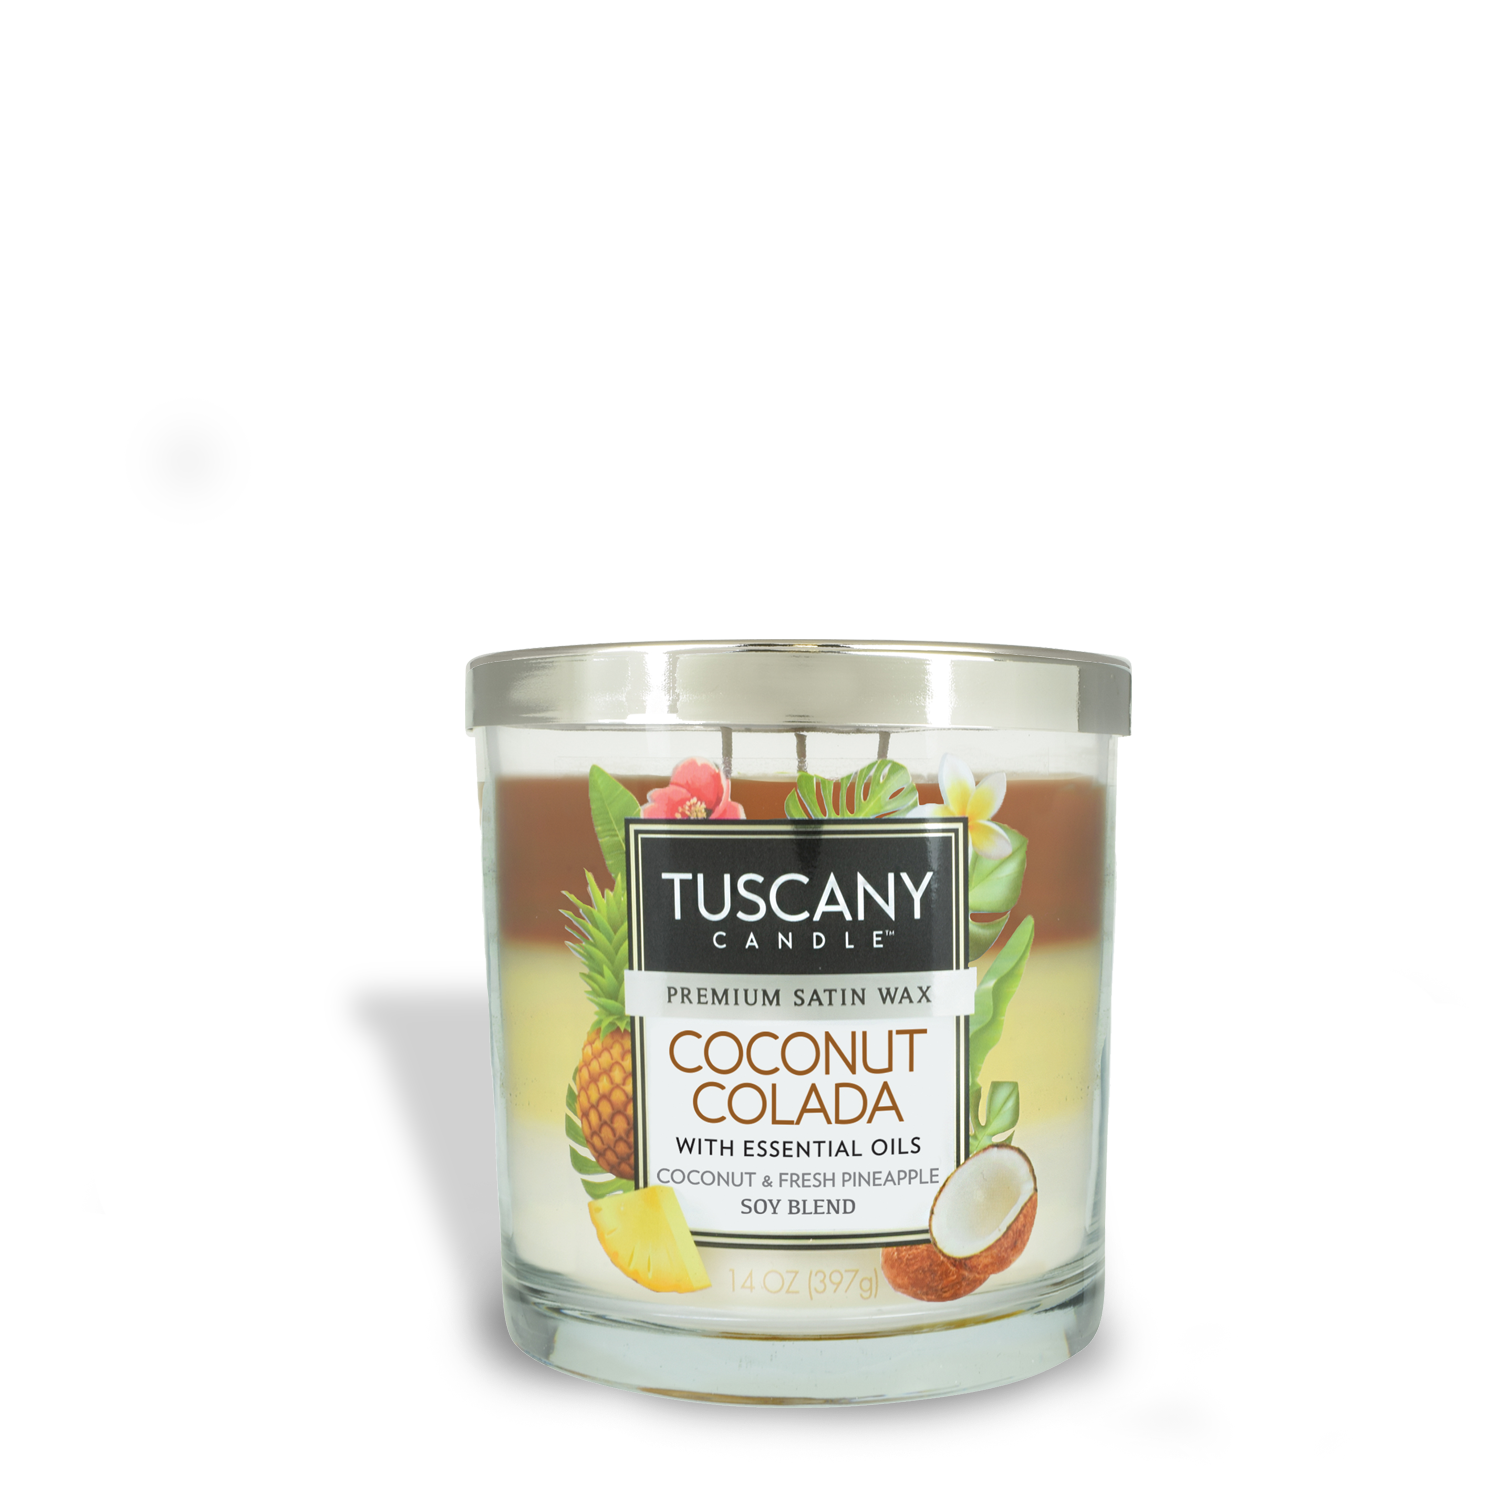 Experience the ultimate tropical getaway with our Tuscany Candle Coconut Colada Long-Lasting Scented Jar Candle (14 oz). Immerse yourself in the alluring scent of coconut colada, transporting you to a blissful paradise.